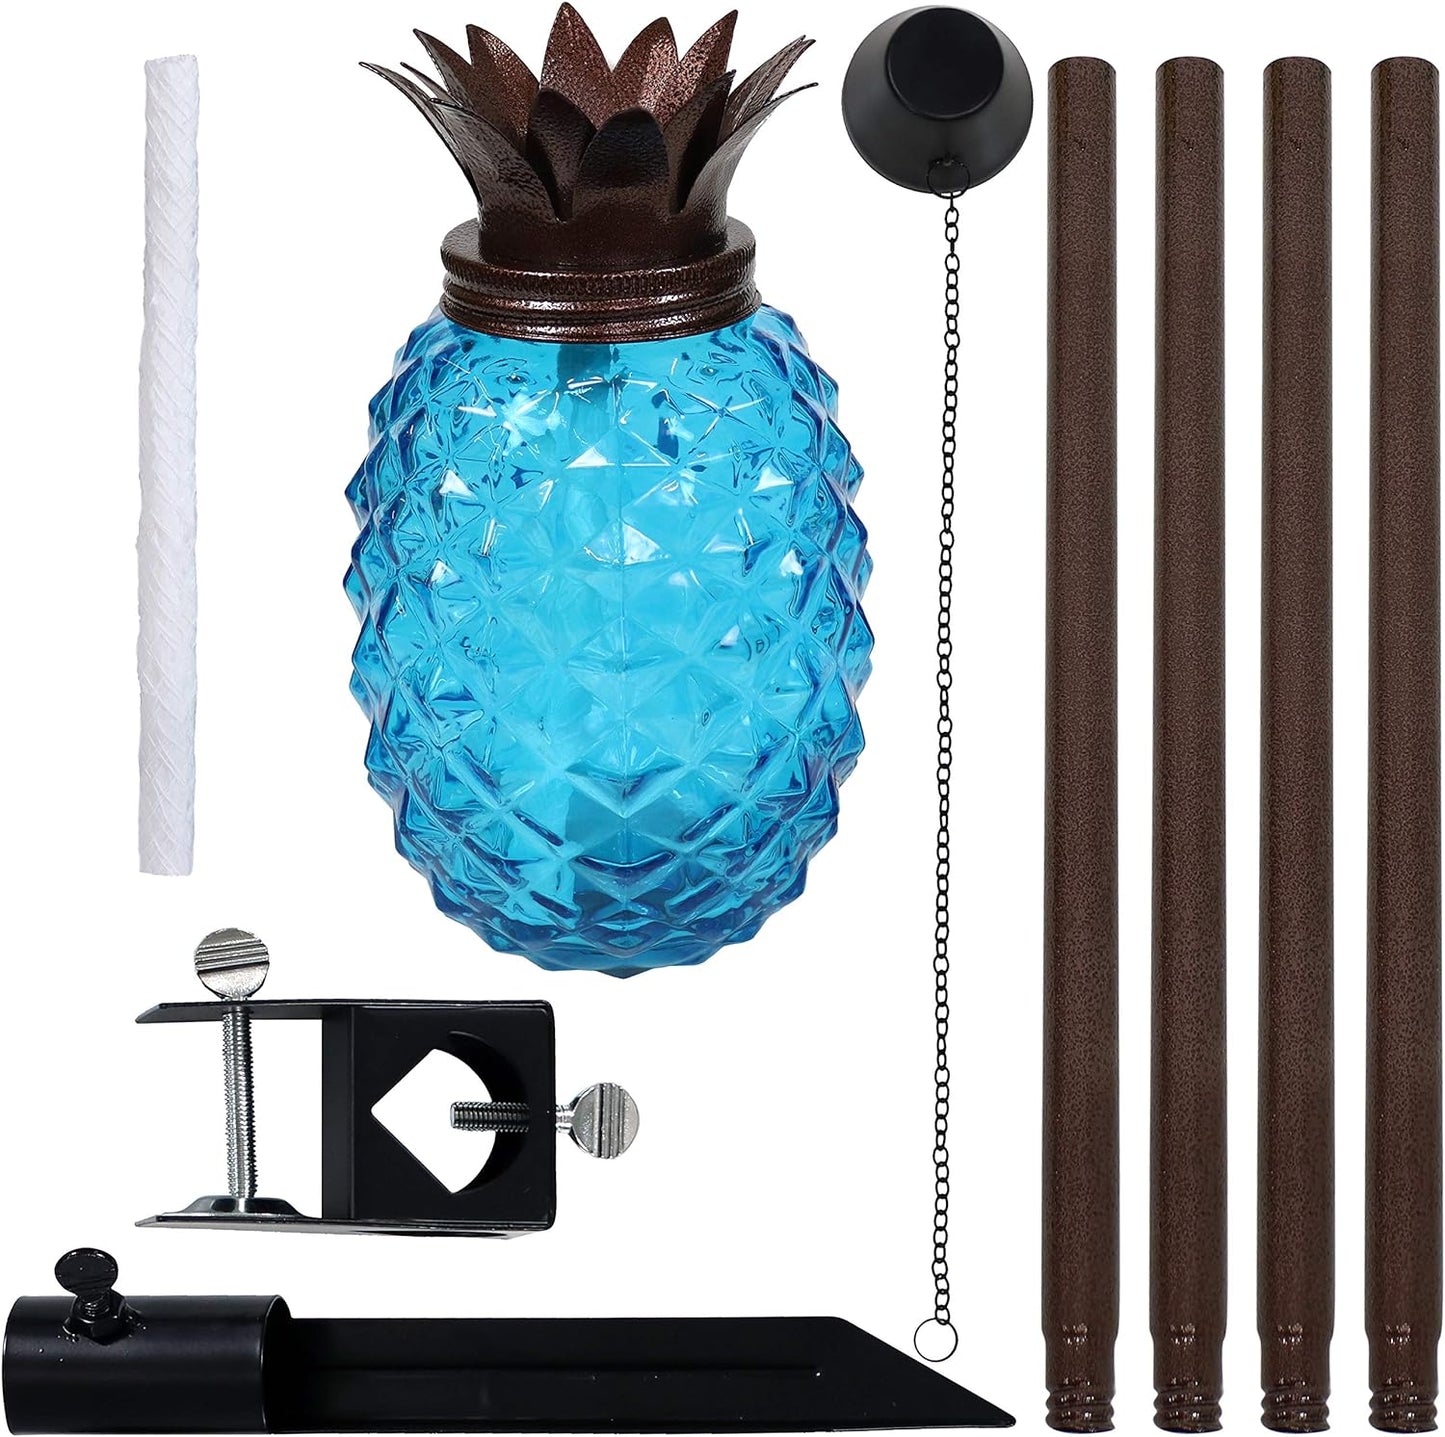 Tropical Pineapple 3-In-1 Glass Patio Torches - 23- to 63-Inch Adjustable Height - Set of 2 - Blue